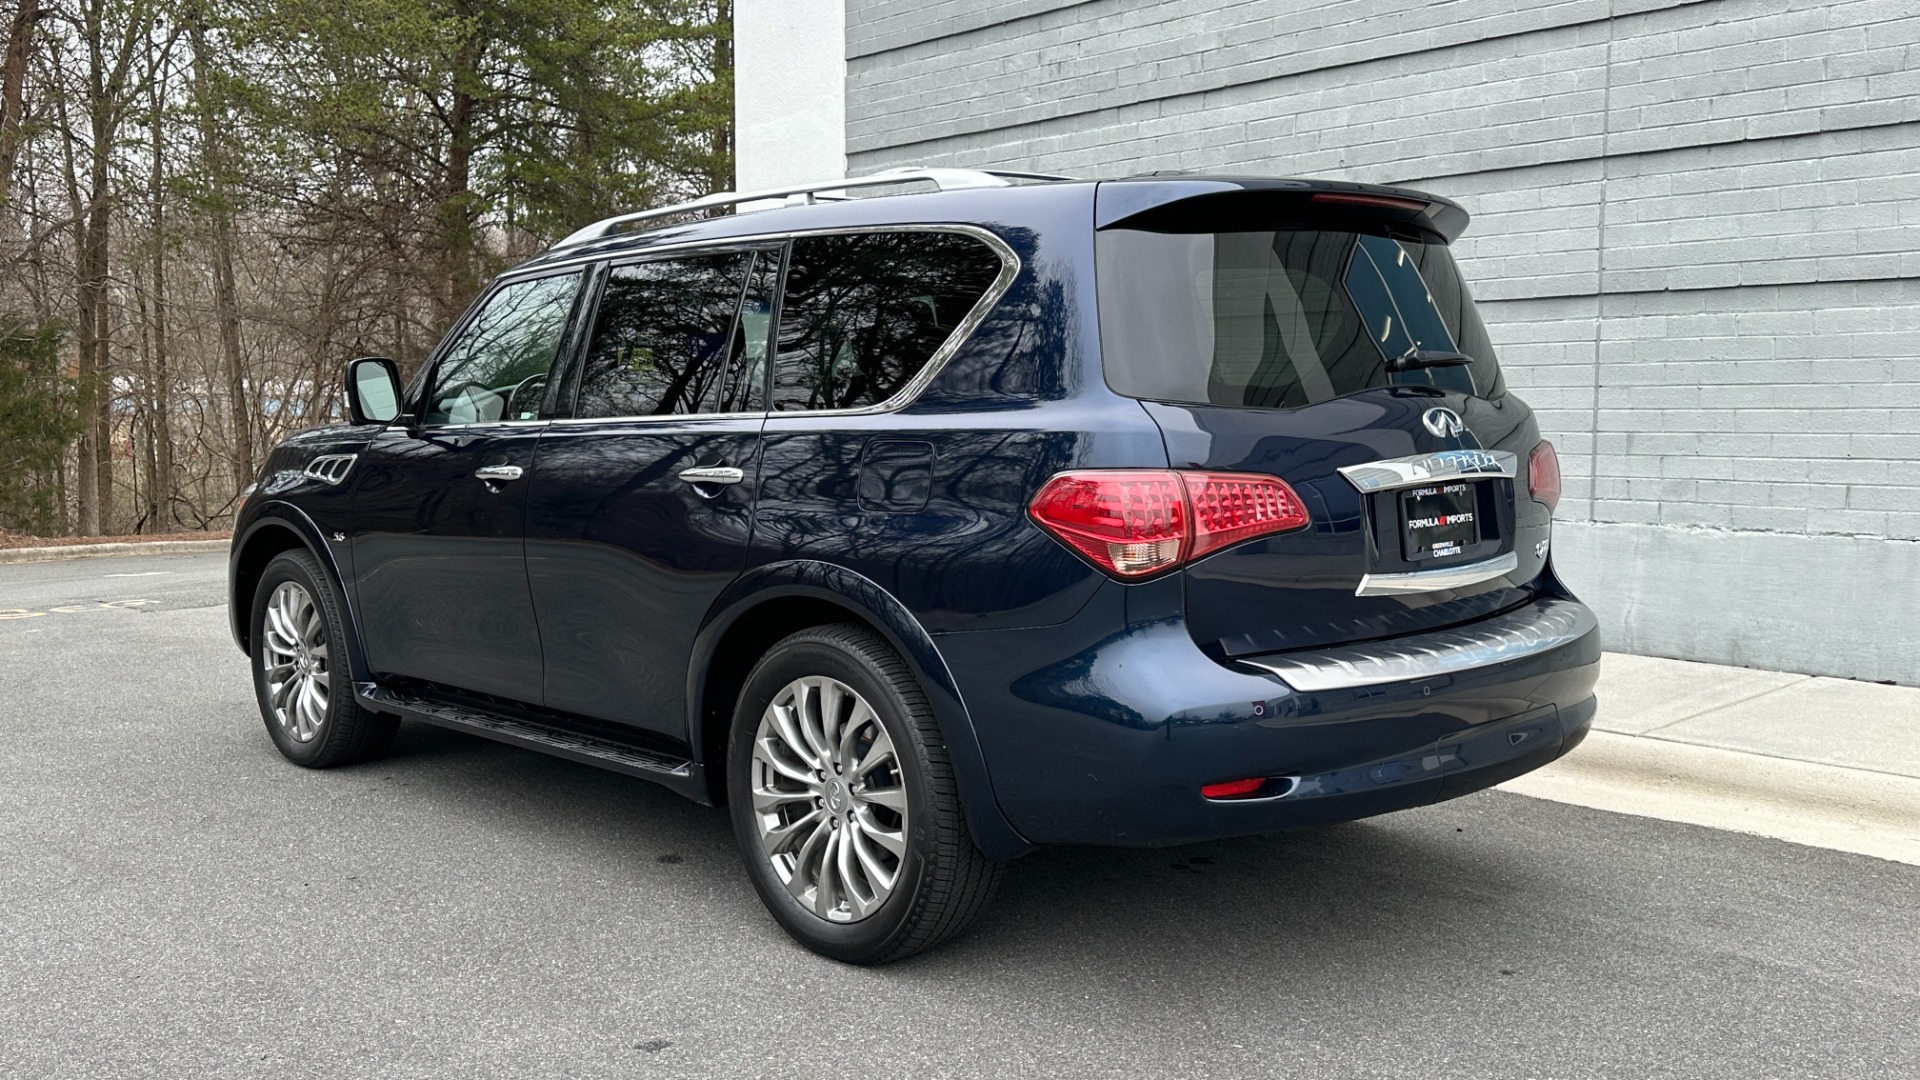 Used 2016 INFINITI QX80 LIMITED / 22IN WHEELS / THEATER PACKAGE / DRIVER ASSISTANCE / V8 / 4WD for sale $33,995 at Formula Imports in Charlotte NC 28227 4